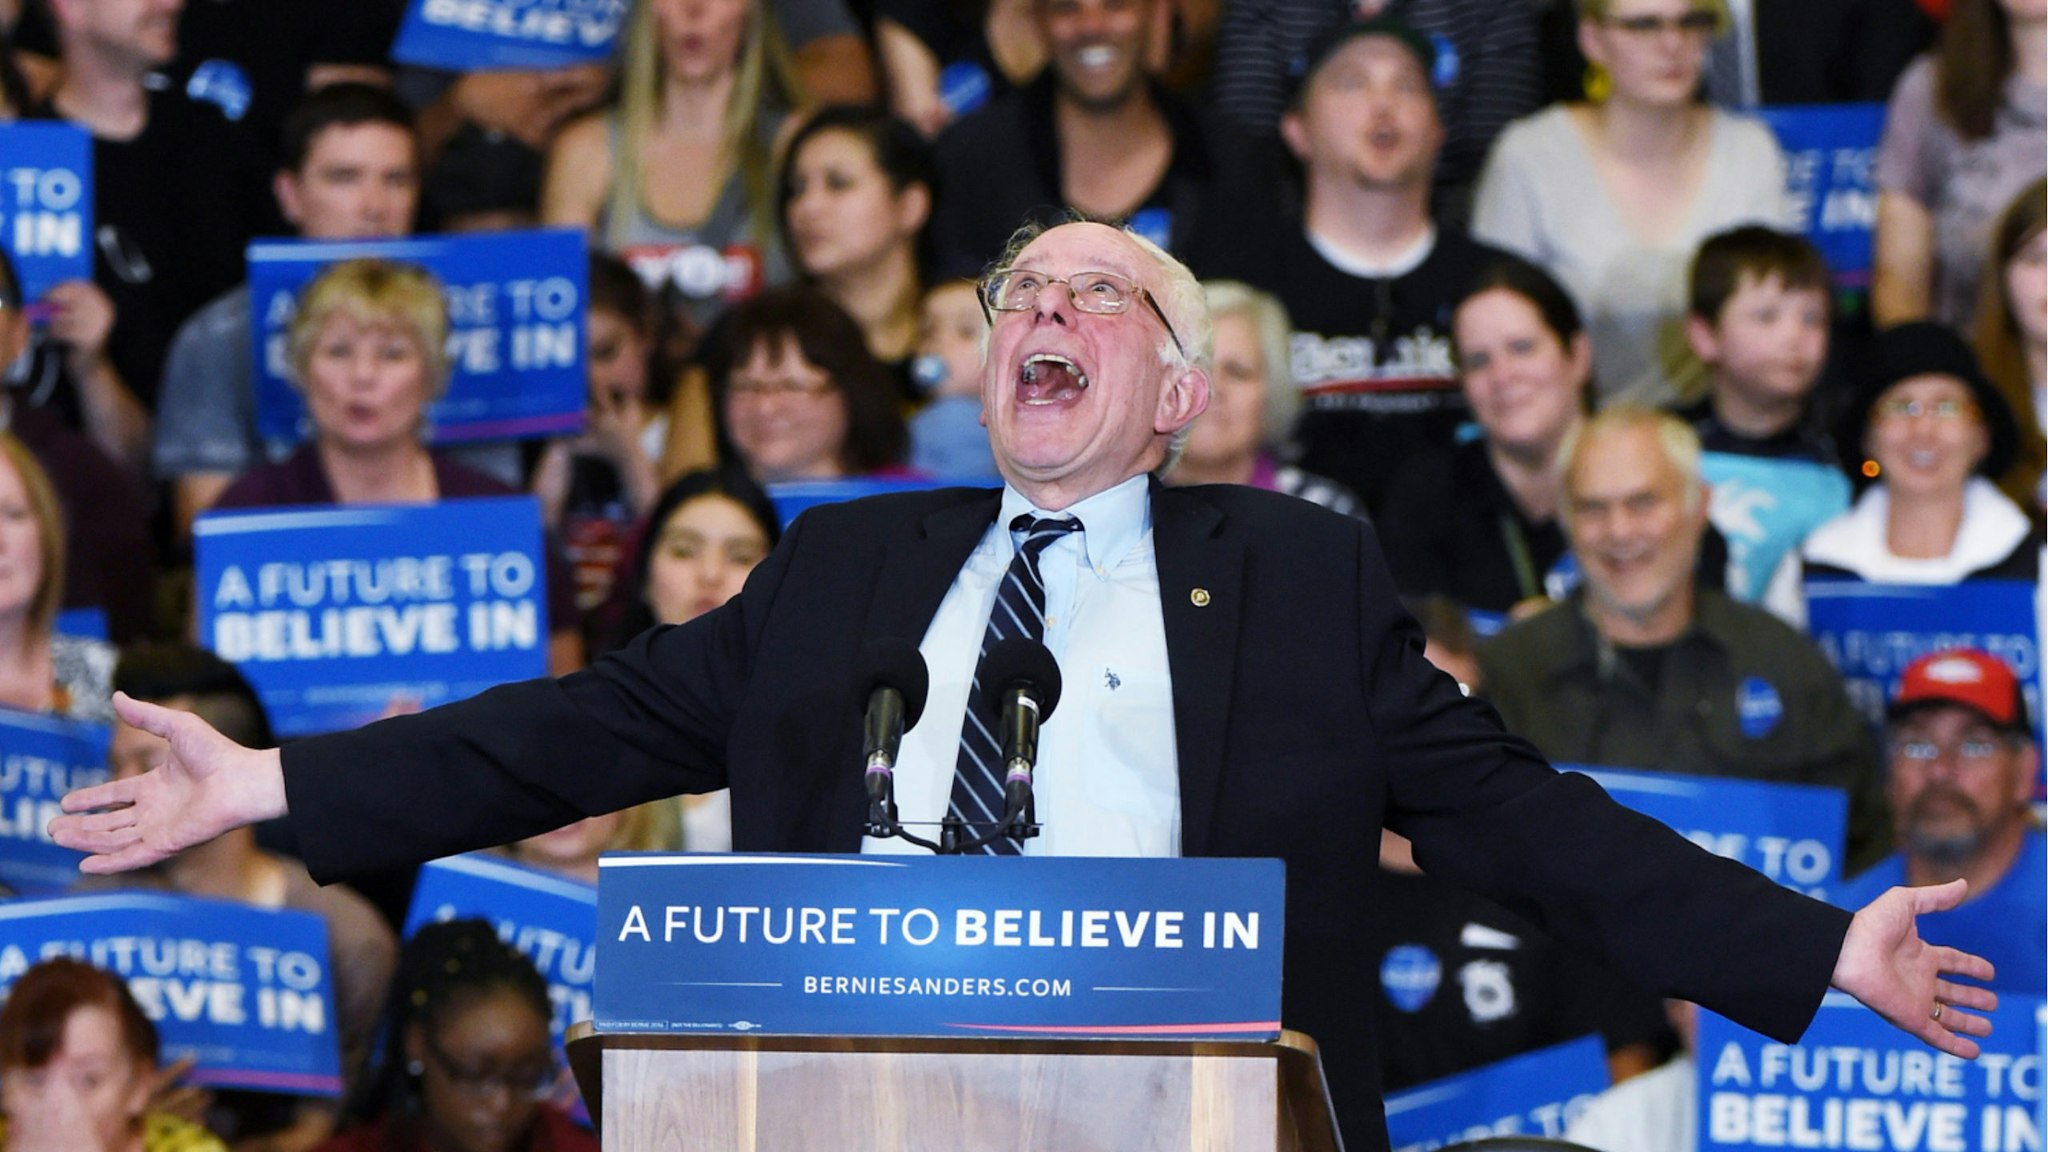 Democratic presidential candidate Sen. Bernie Sanders (D-VT) jokes around as he speaks during a campaign rally at Bonanza High School on February 14, 2016 in Las Vegas, Nevada.